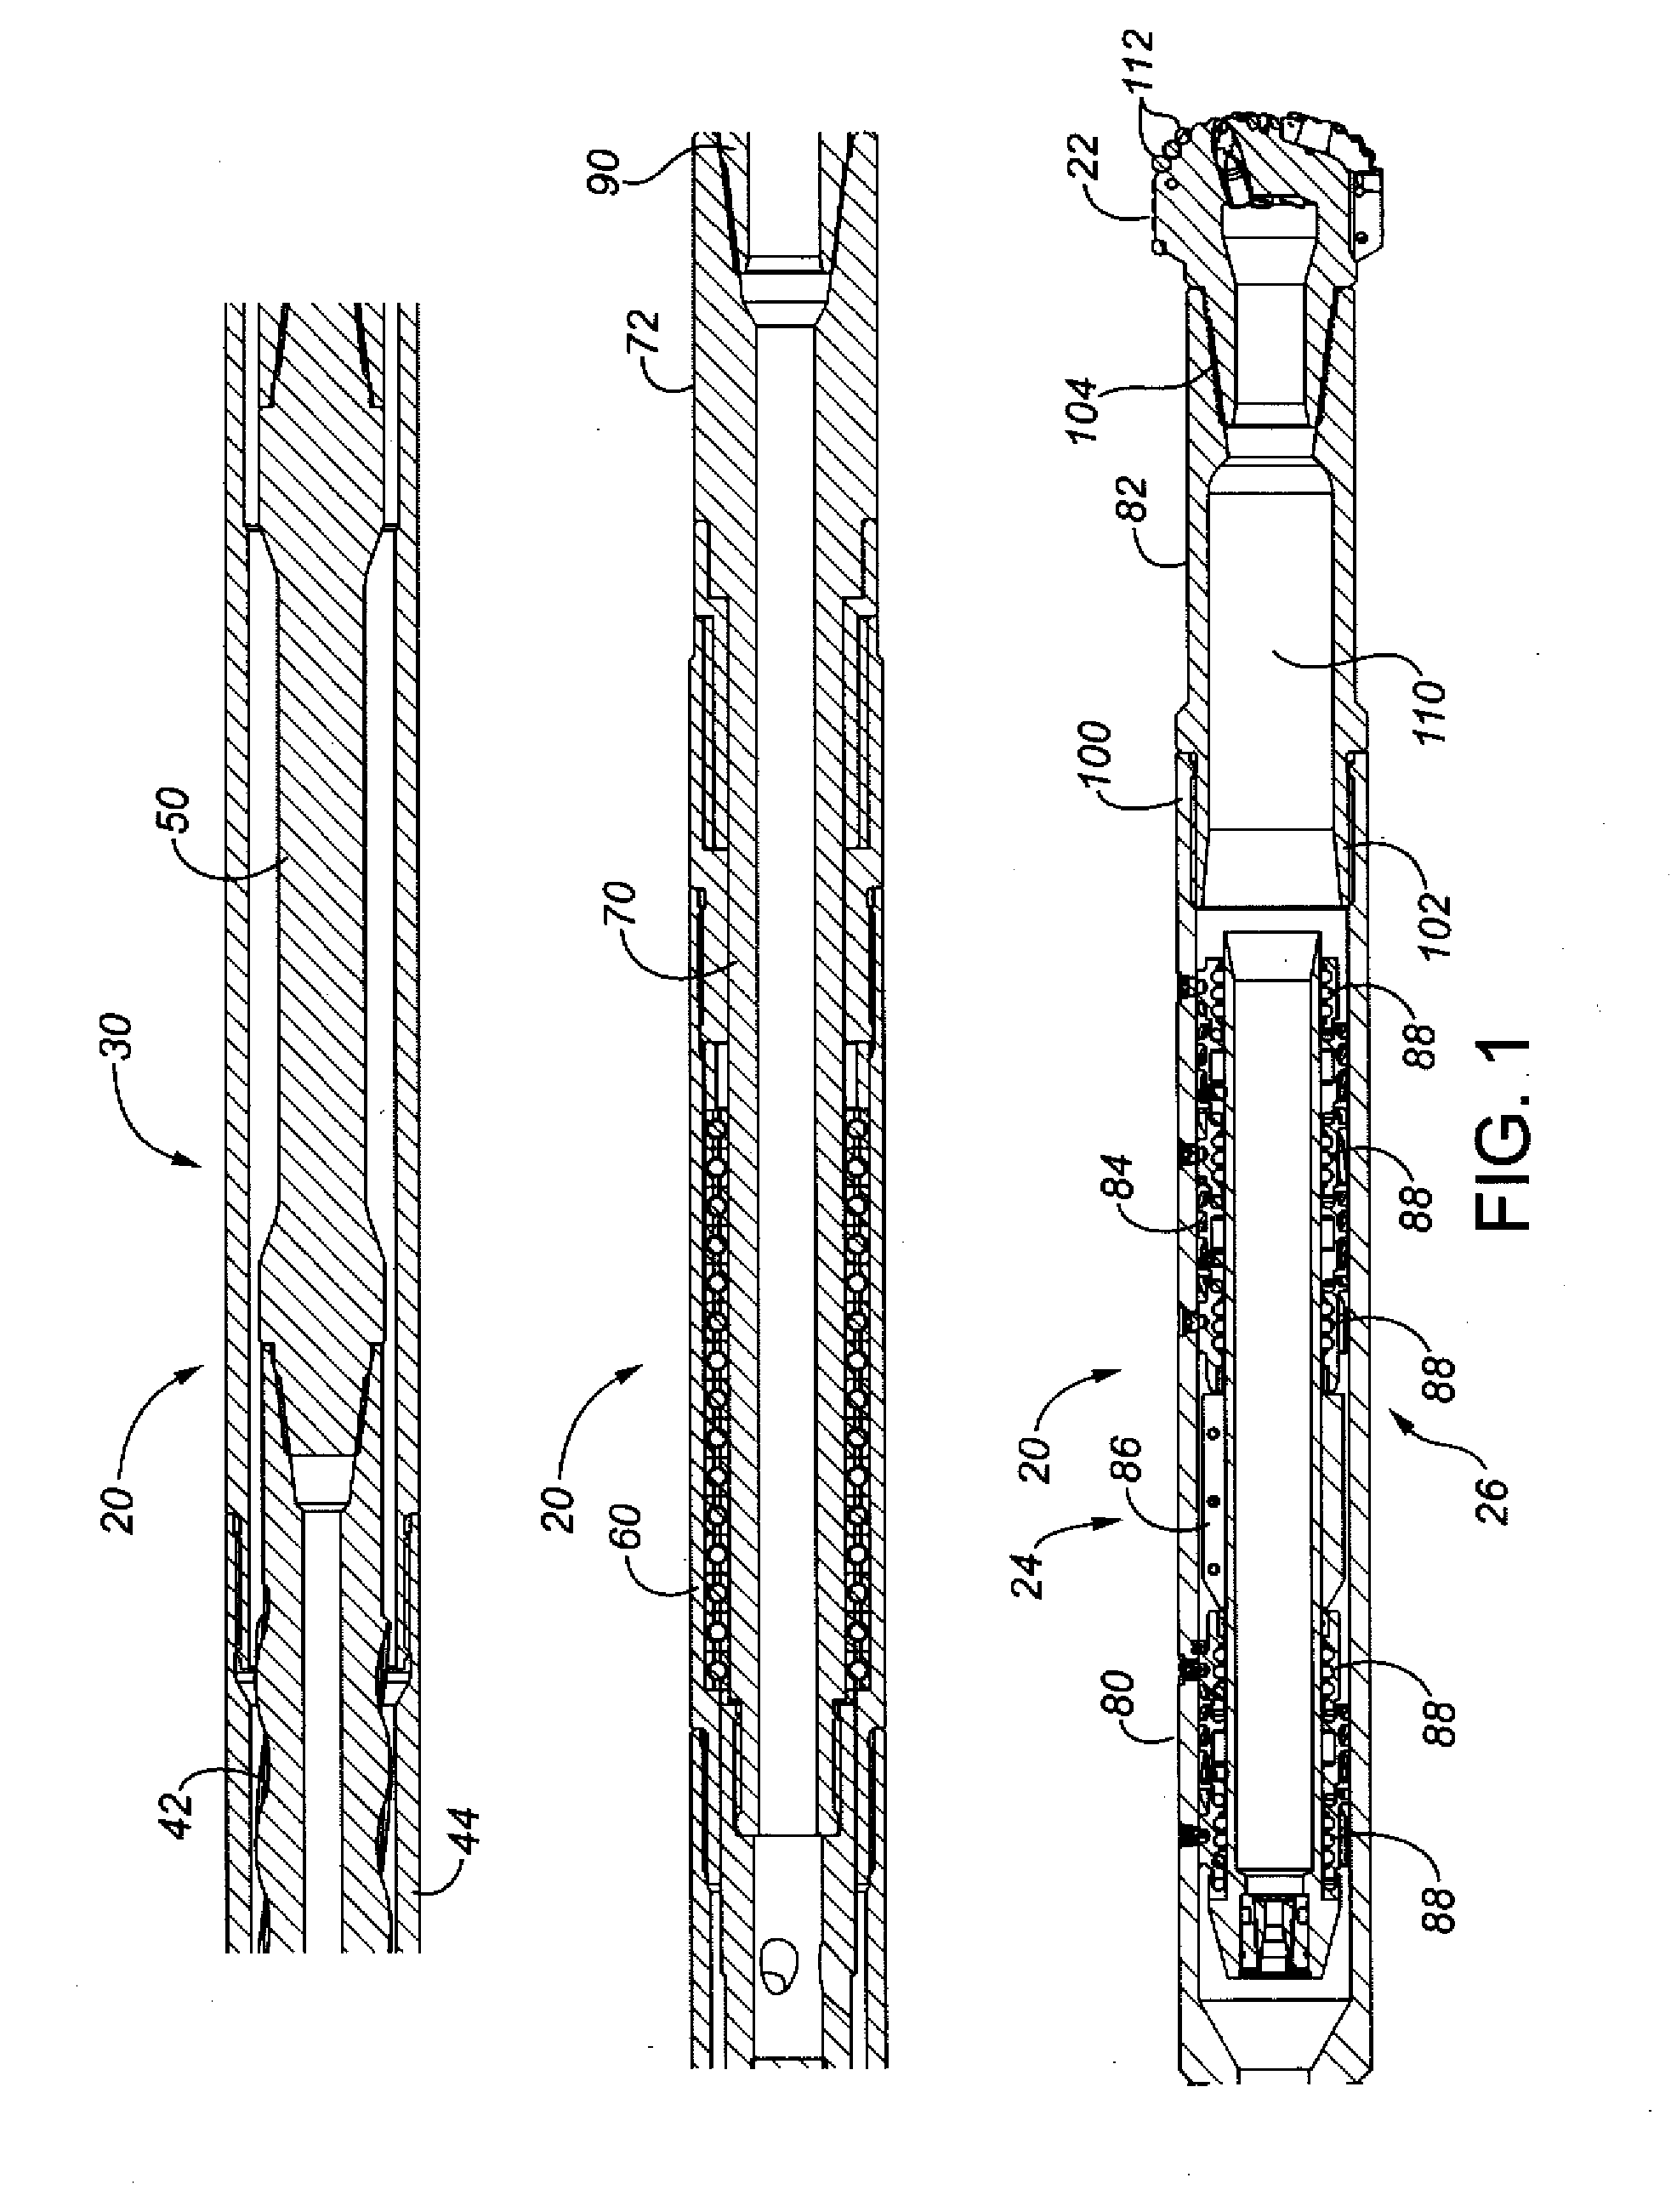 Drilling apparatus and method